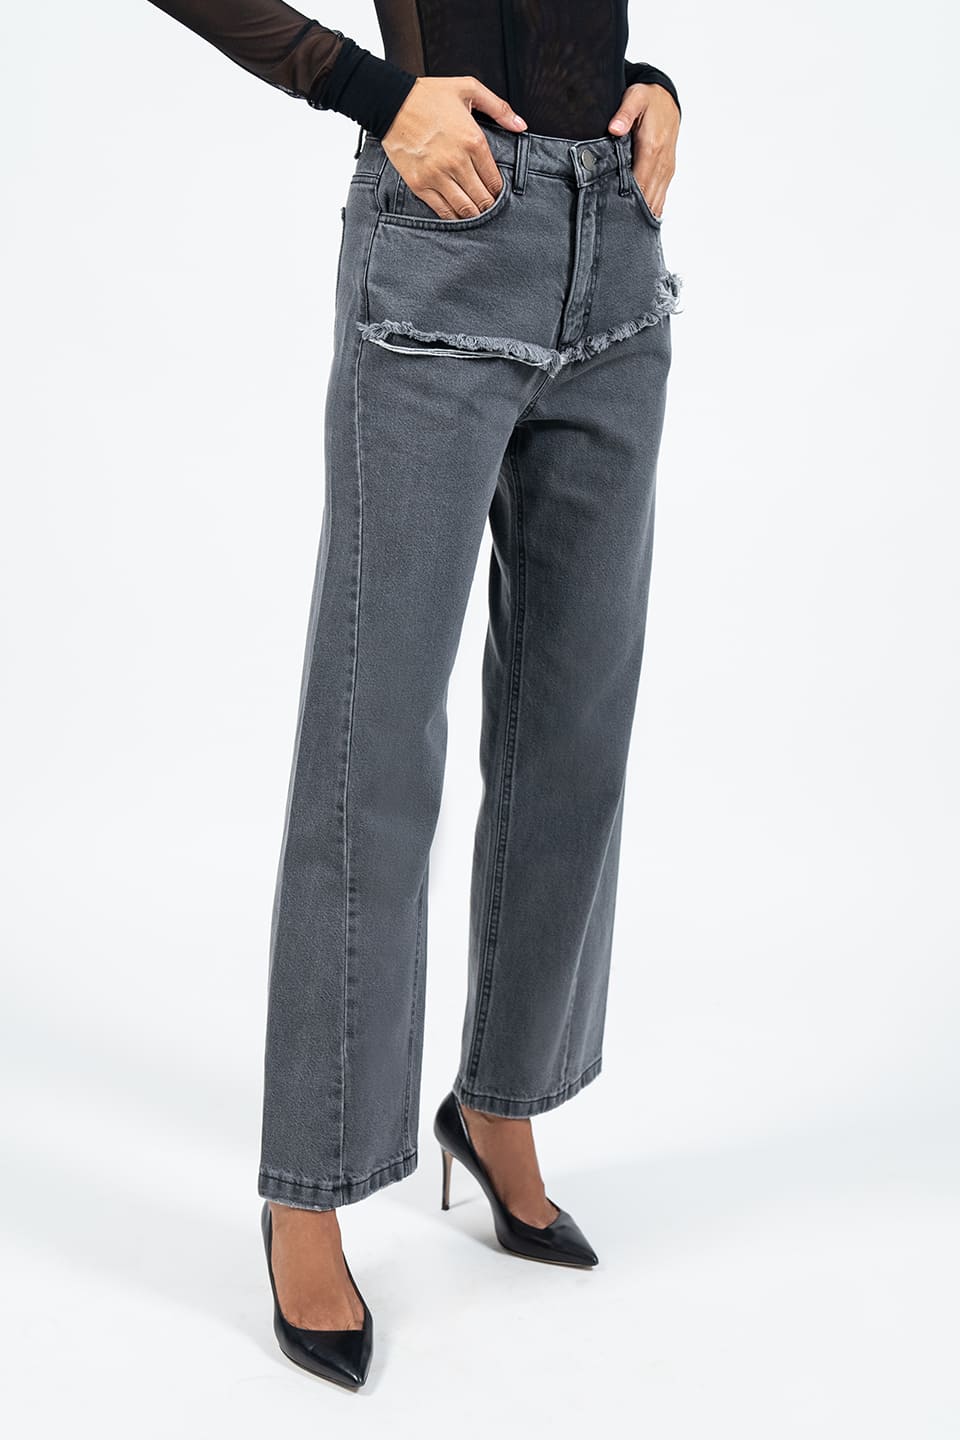 Designer Grey Jeans, shop online with free delivery in UAE. Product gallery 2